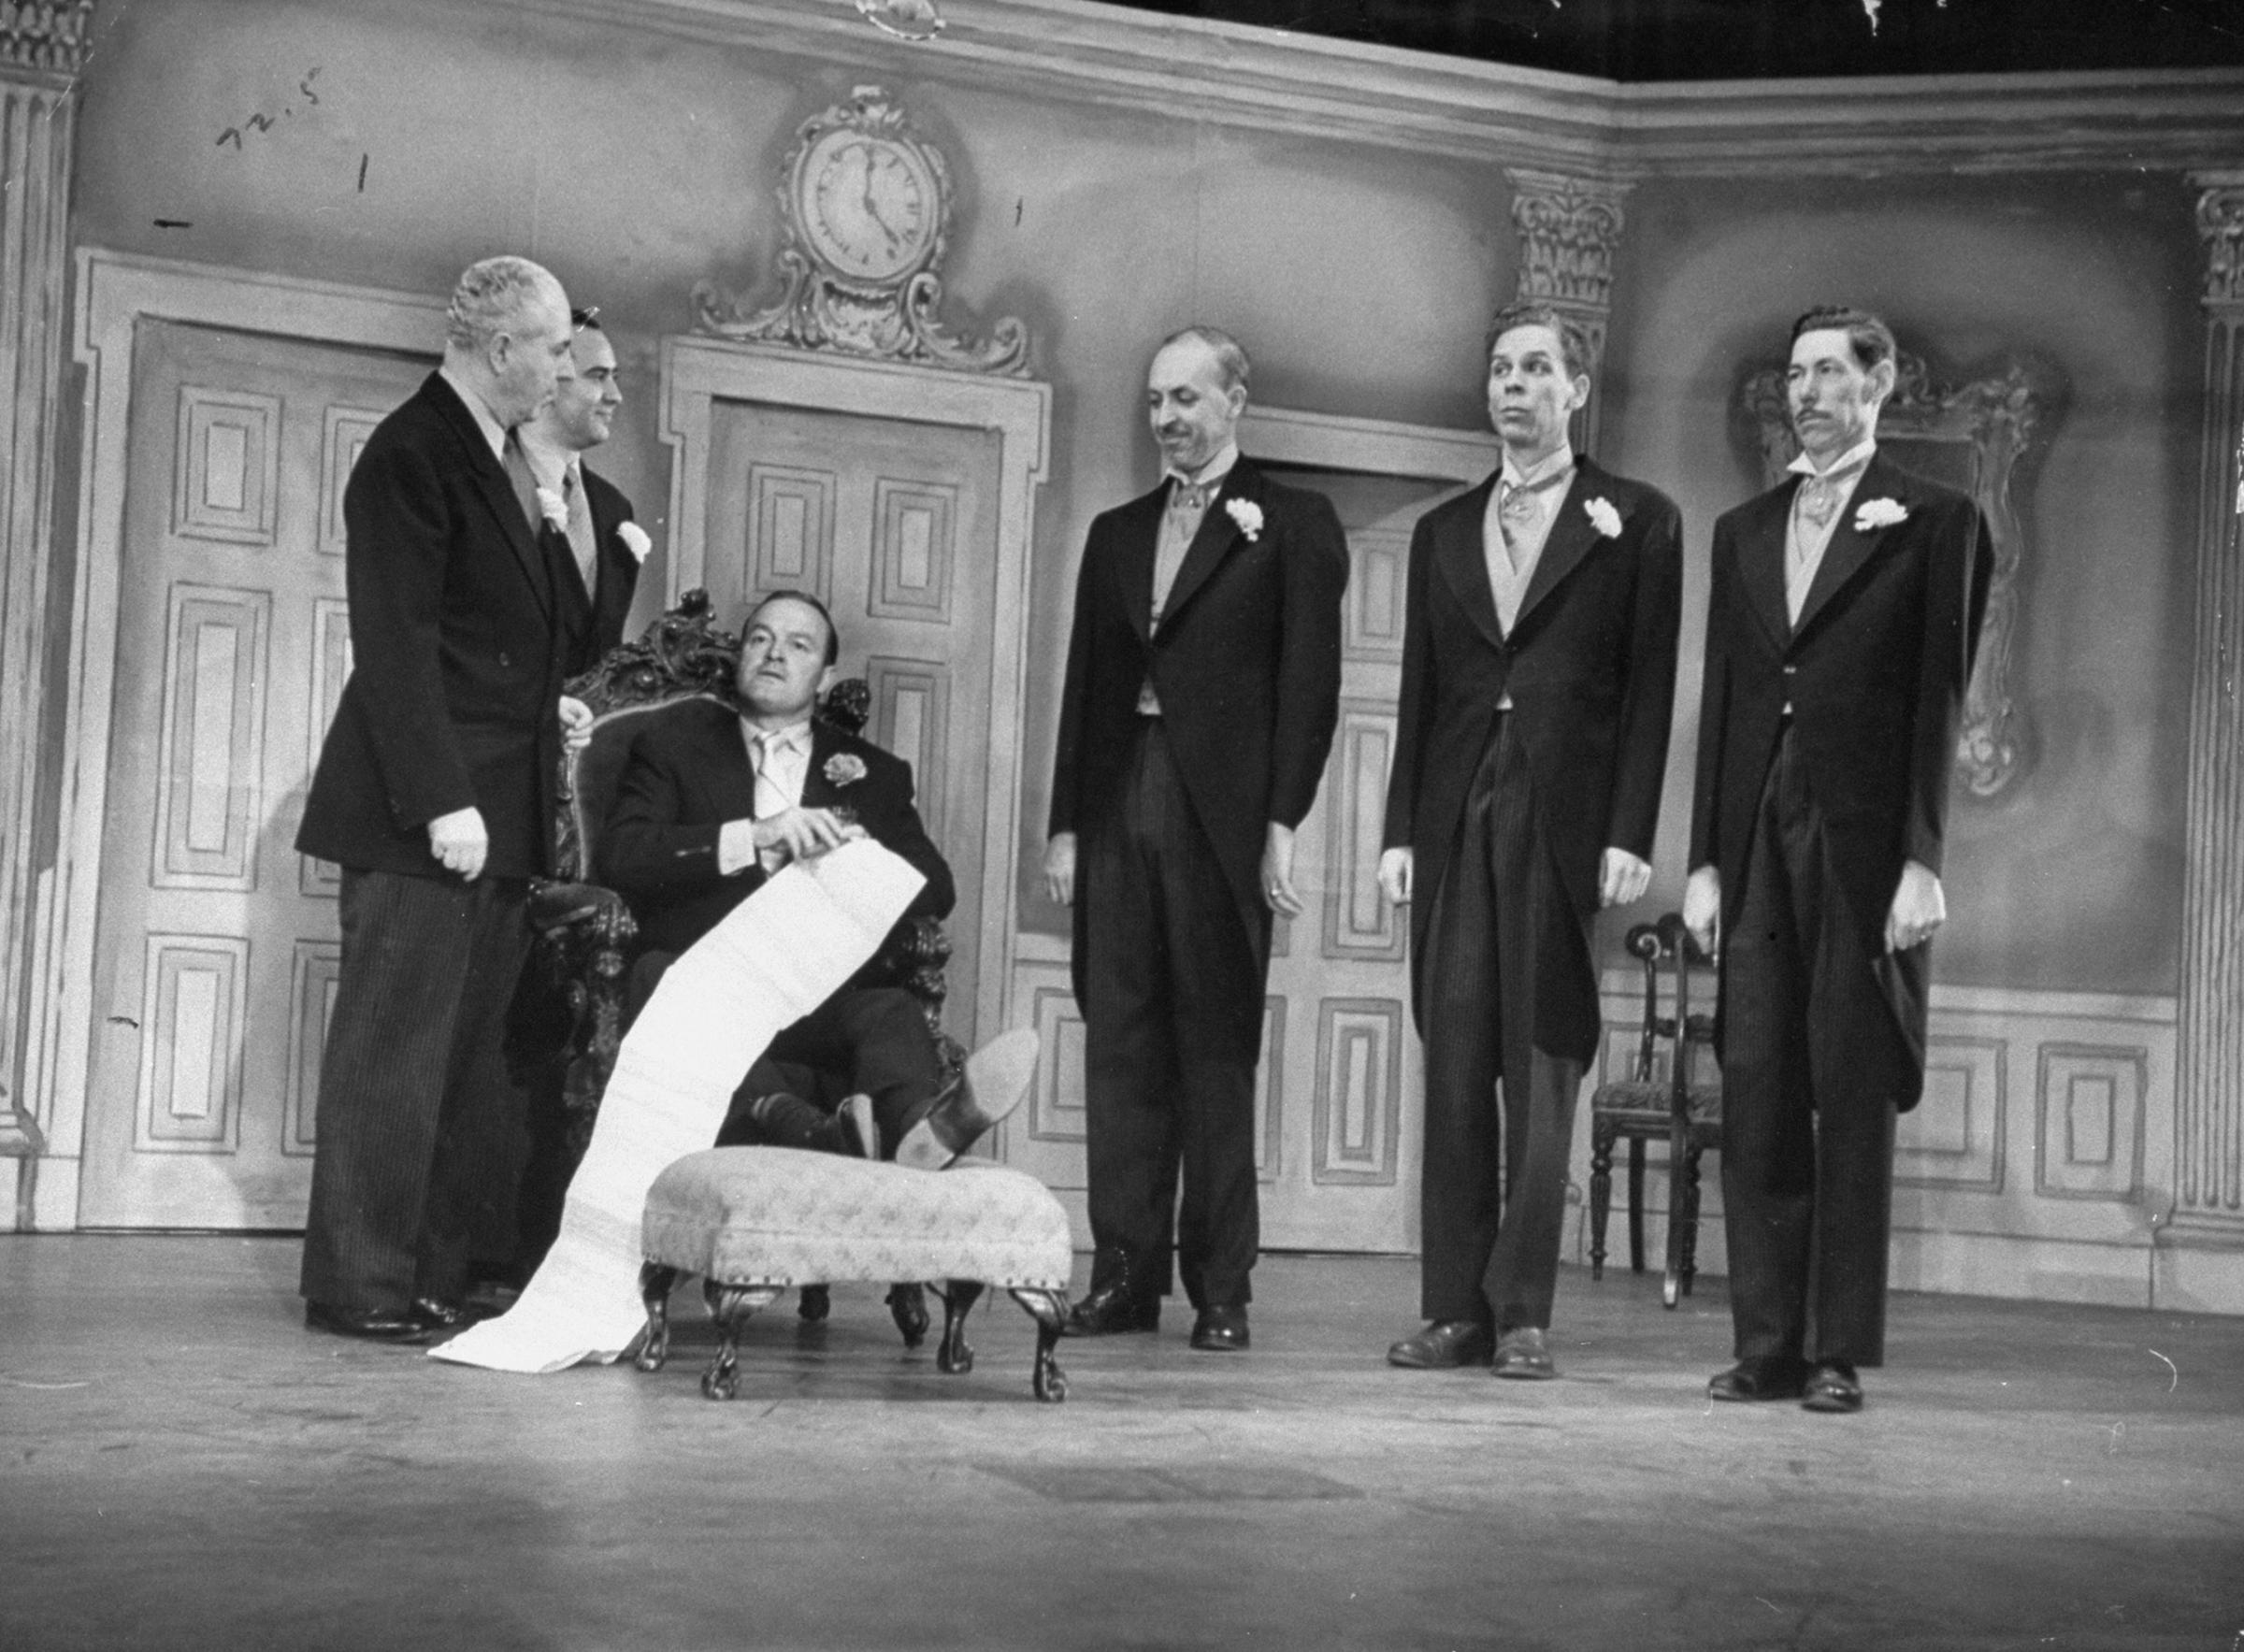 Bob Hope (seated) performing in a skit on his own TV show, 1950.